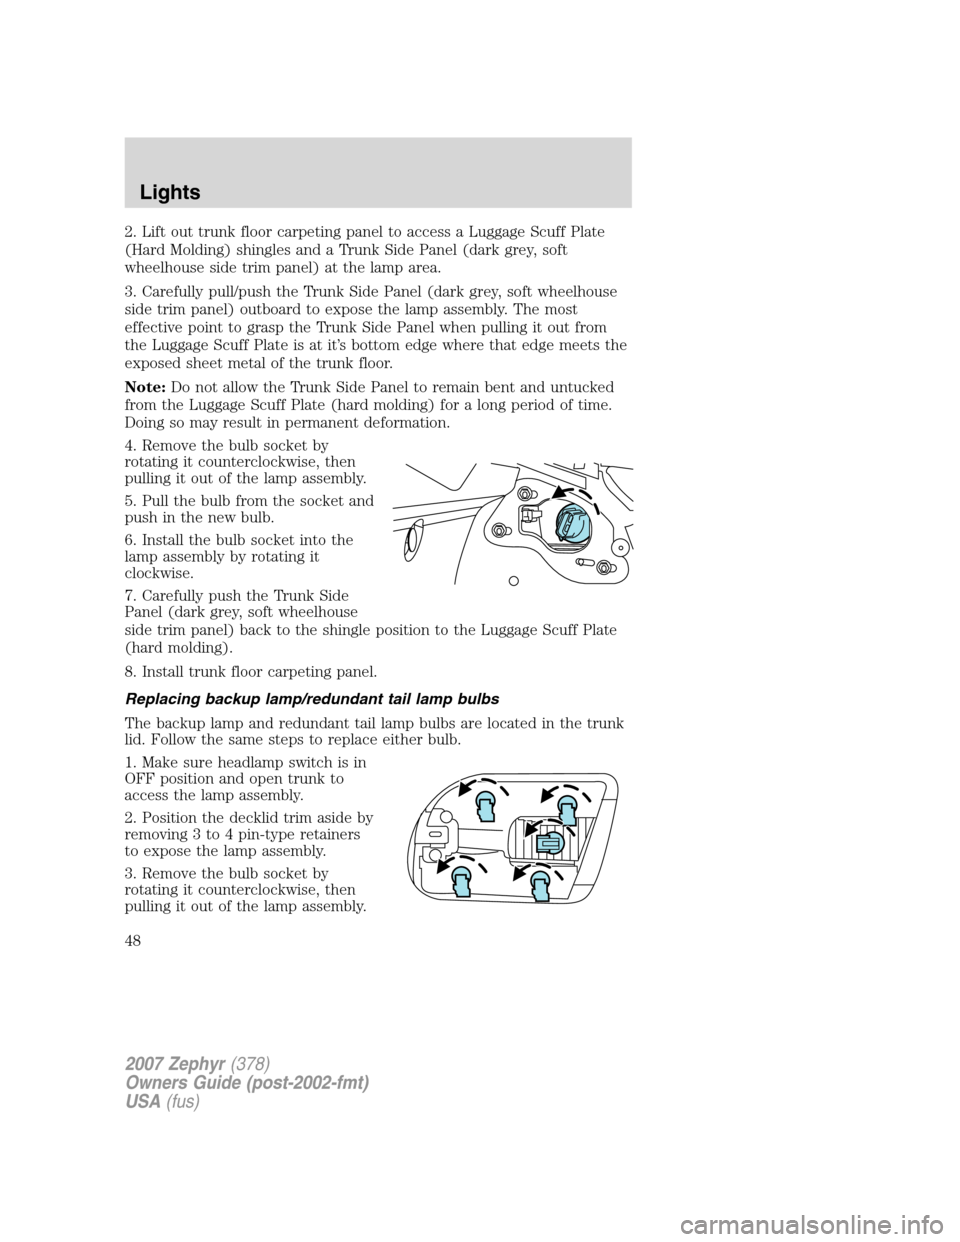 LINCOLN MKZ 2007 Service Manual 2. Lift out trunk floor carpeting panel to access a Luggage Scuff Plate
(Hard Molding) shingles and a Trunk Side Panel (dark grey, soft
wheelhouse side trim panel) at the lamp area.
3. Carefully pull/